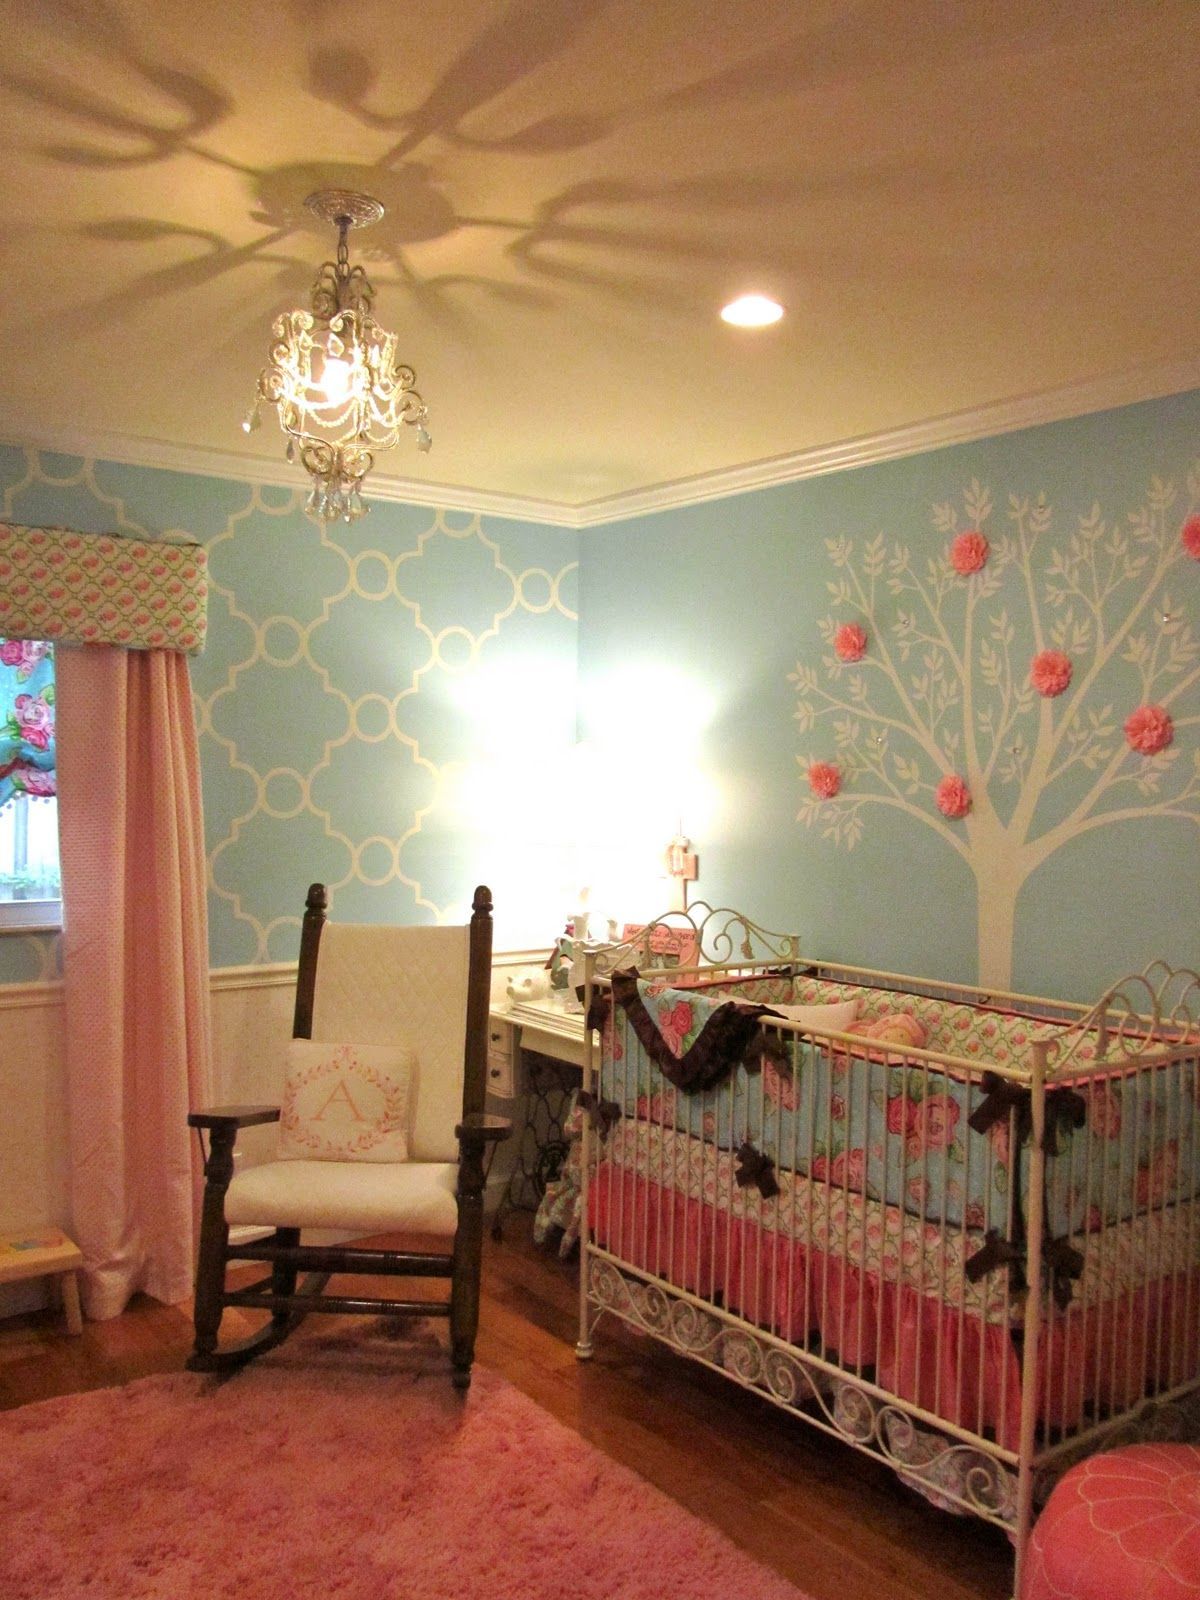 Gorgeous baby girl room!